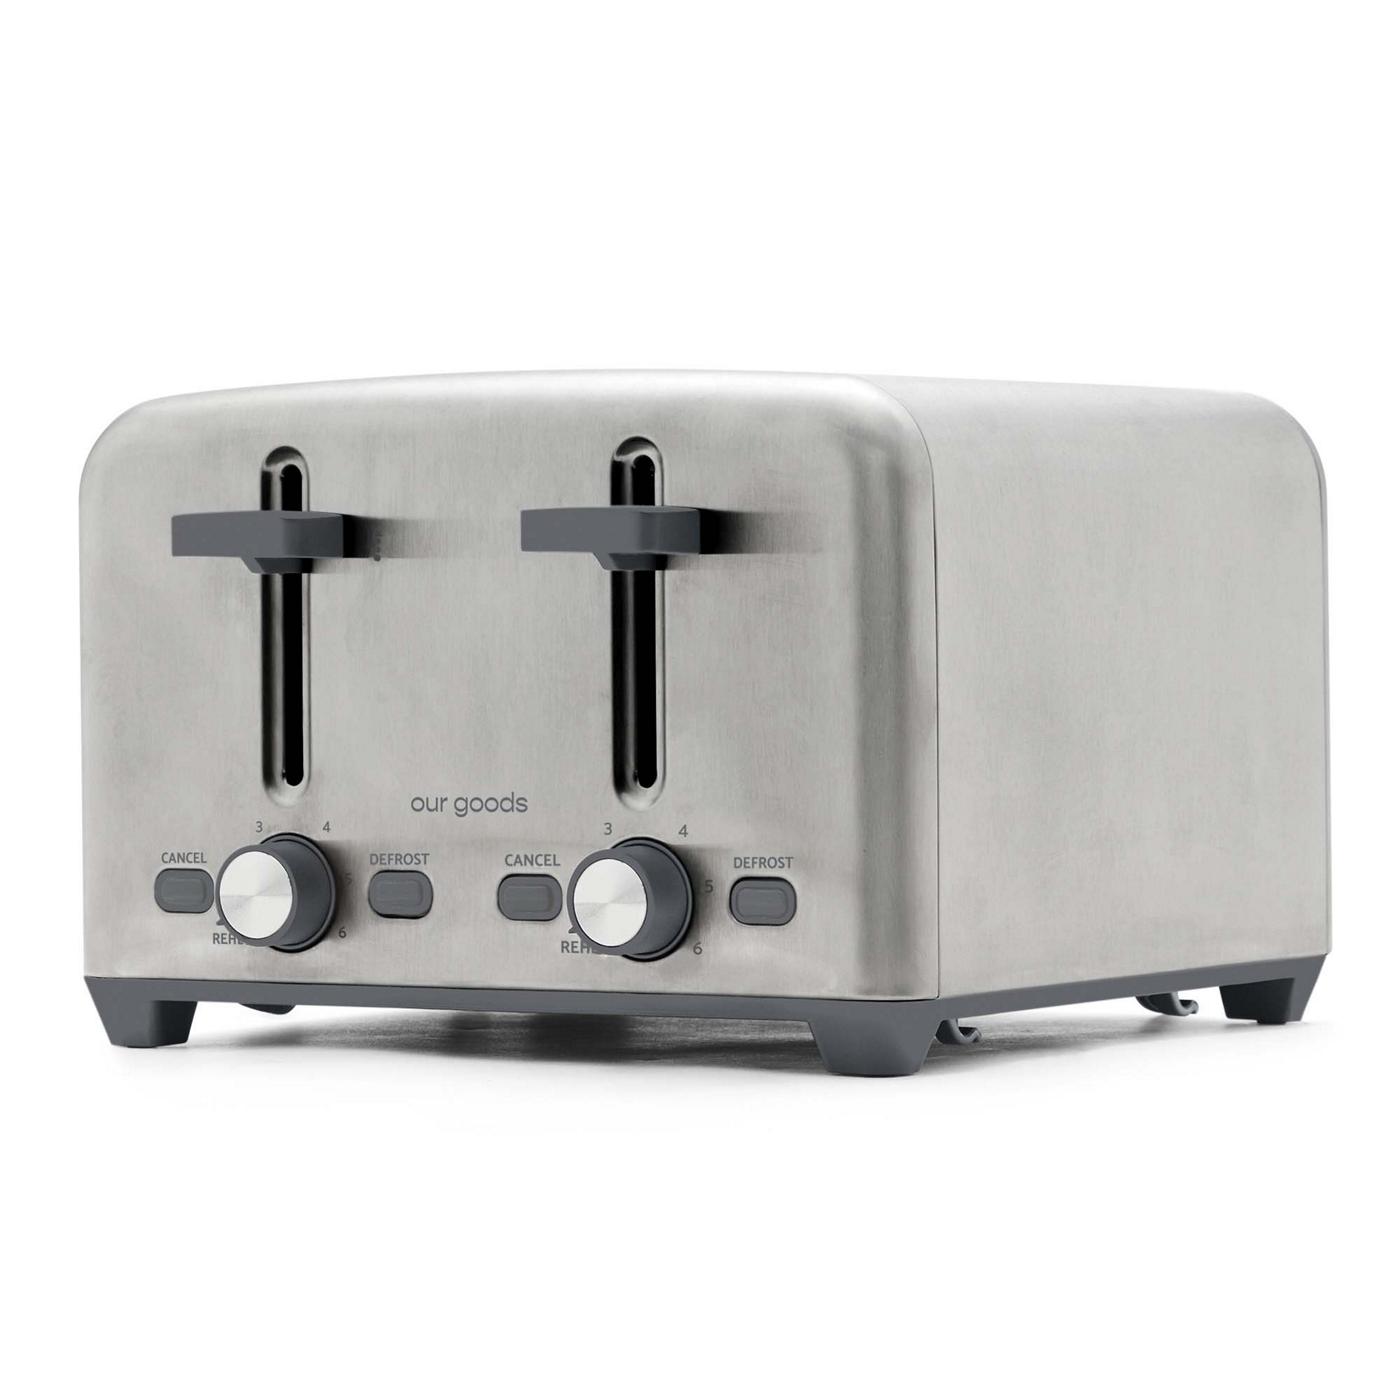 Hamilton Beach 2 in 1 Countertop Oven Long Slot Toaster Stainless Steel